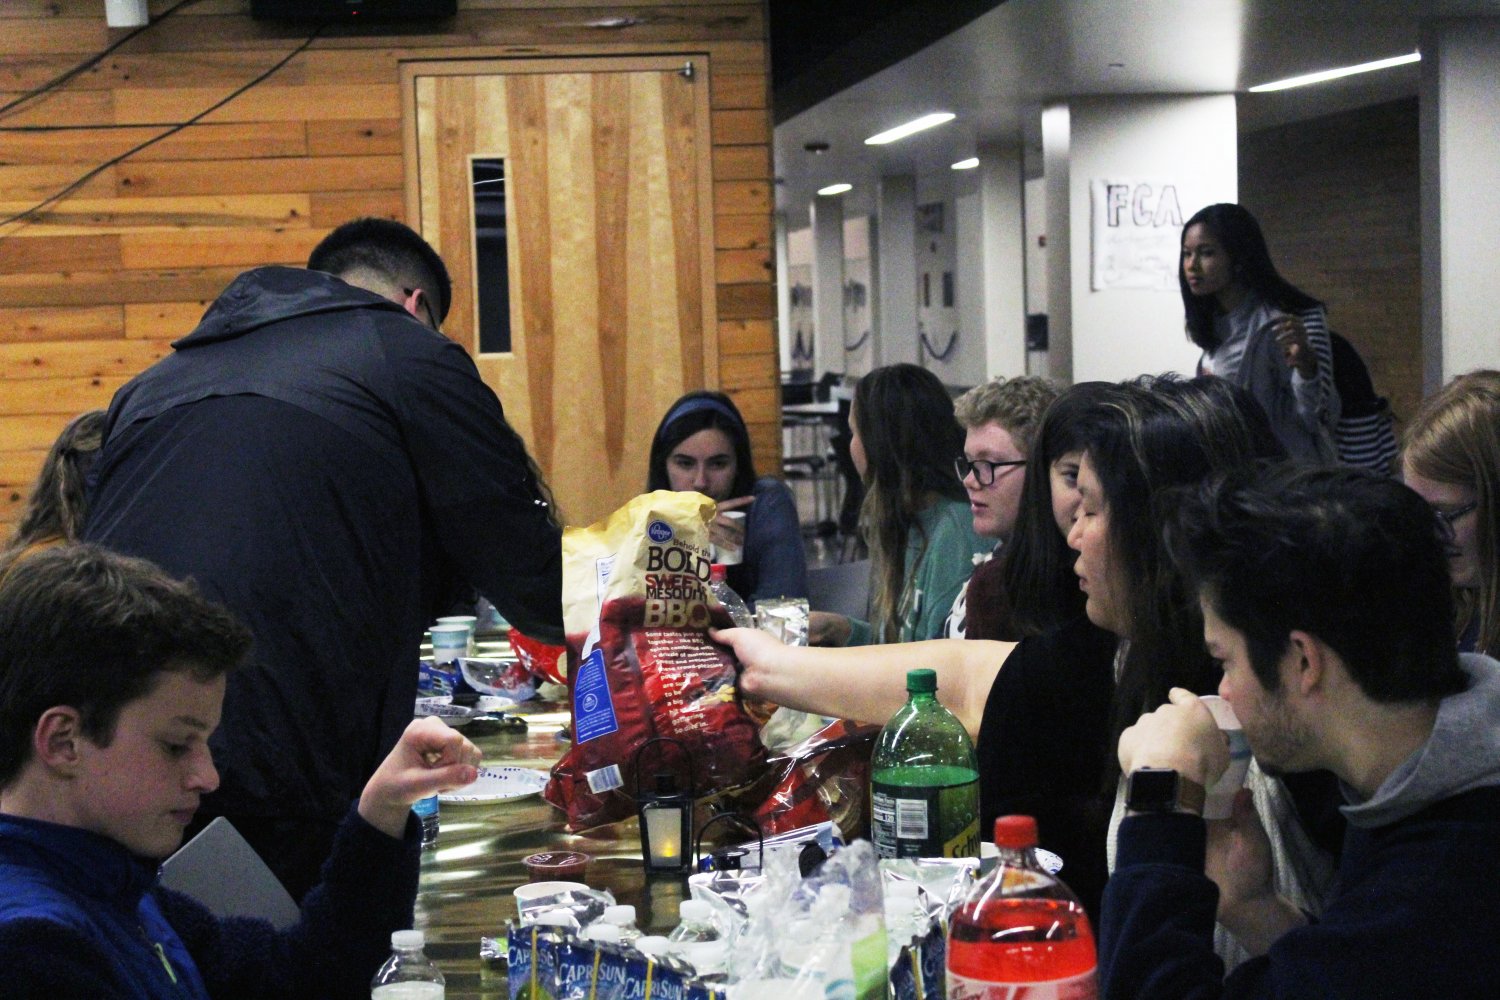 Freshman Neo Kim reaches for more food as he converses with friends at the StuCo club feast.
Photo by Kyla Barnett